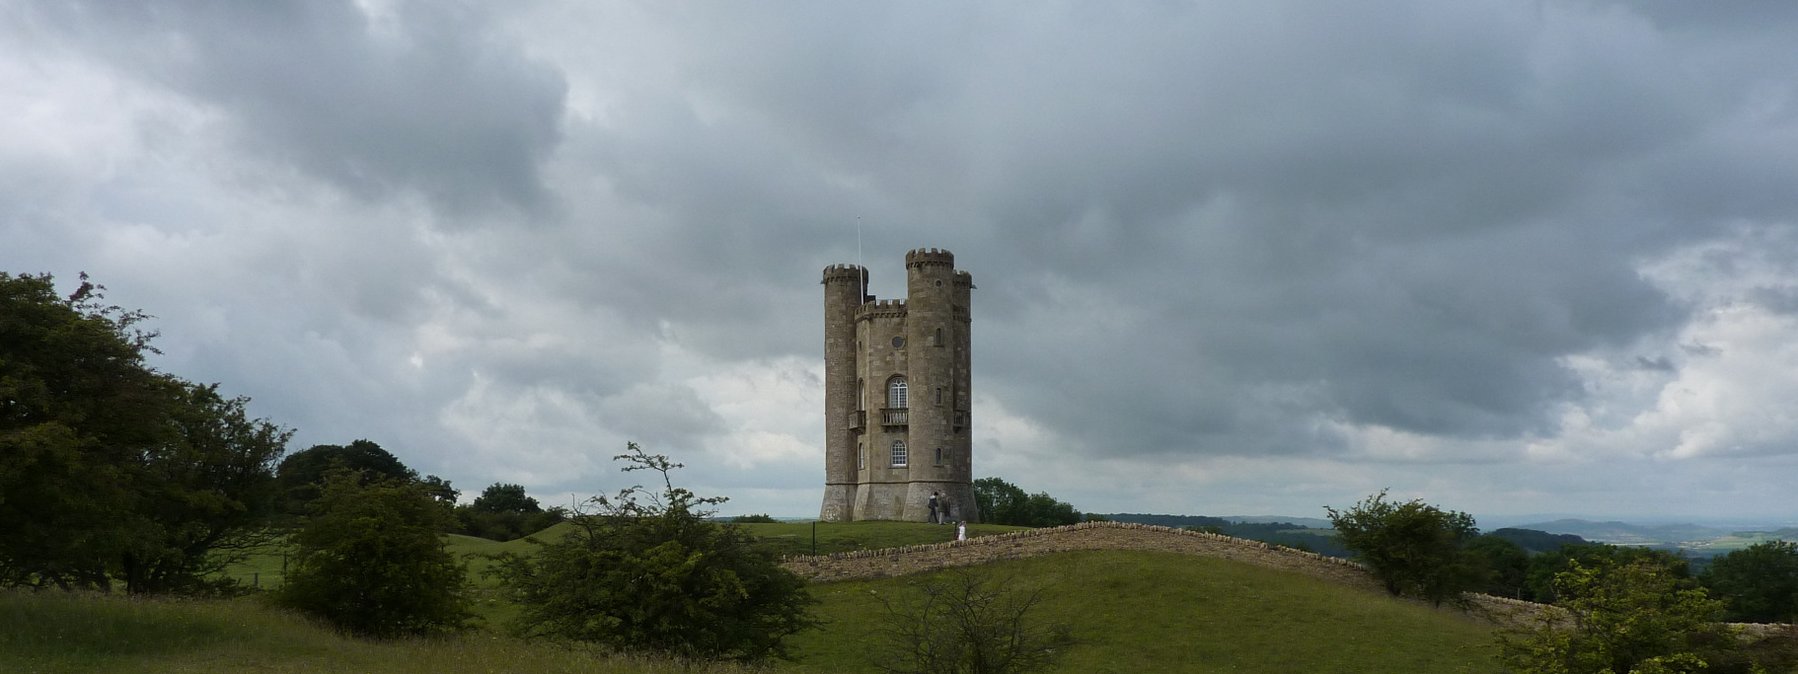 The Broadway Tower